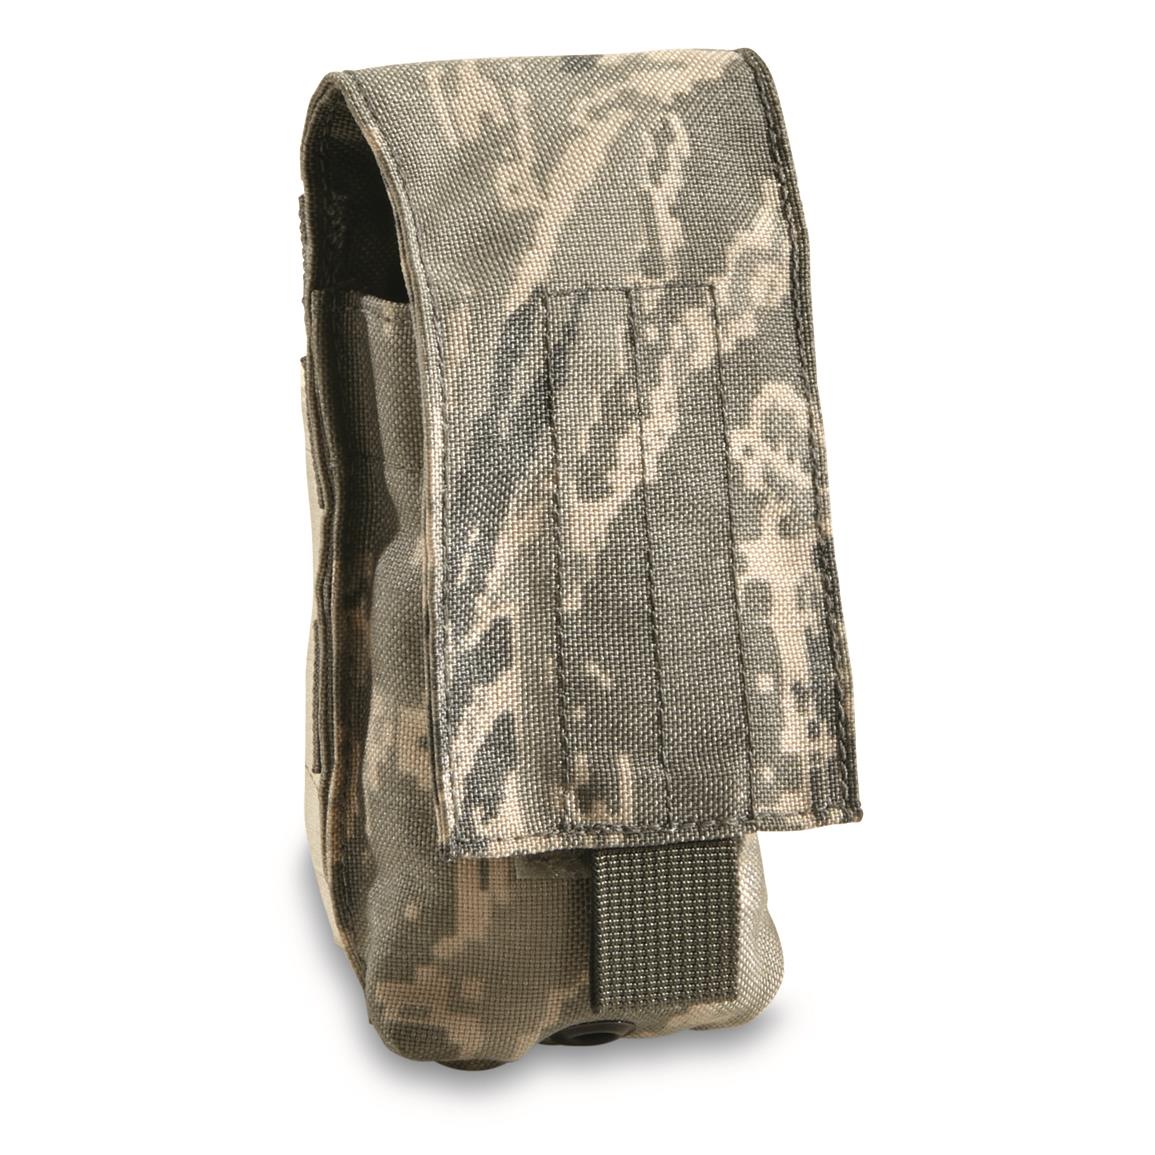 U.S. Air Force Surplus Single Mag Pouch, 2 Pack, New, ABU Camo